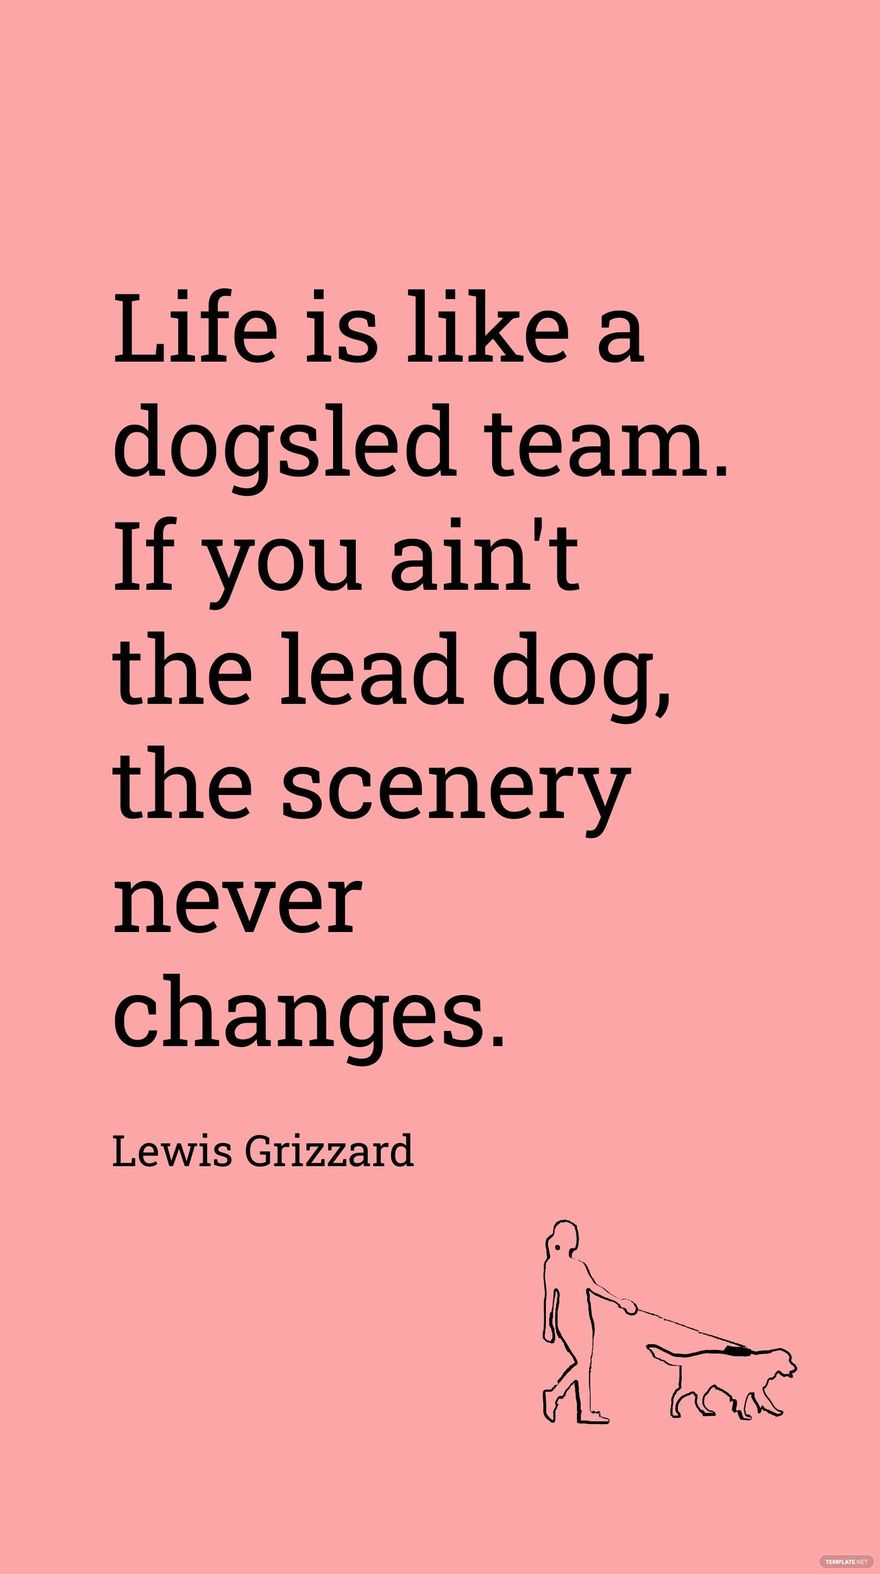 Lewis Grizzard - Life is like a dogsled team. If you ain't the lead dog, the scenery never changes. in JPG